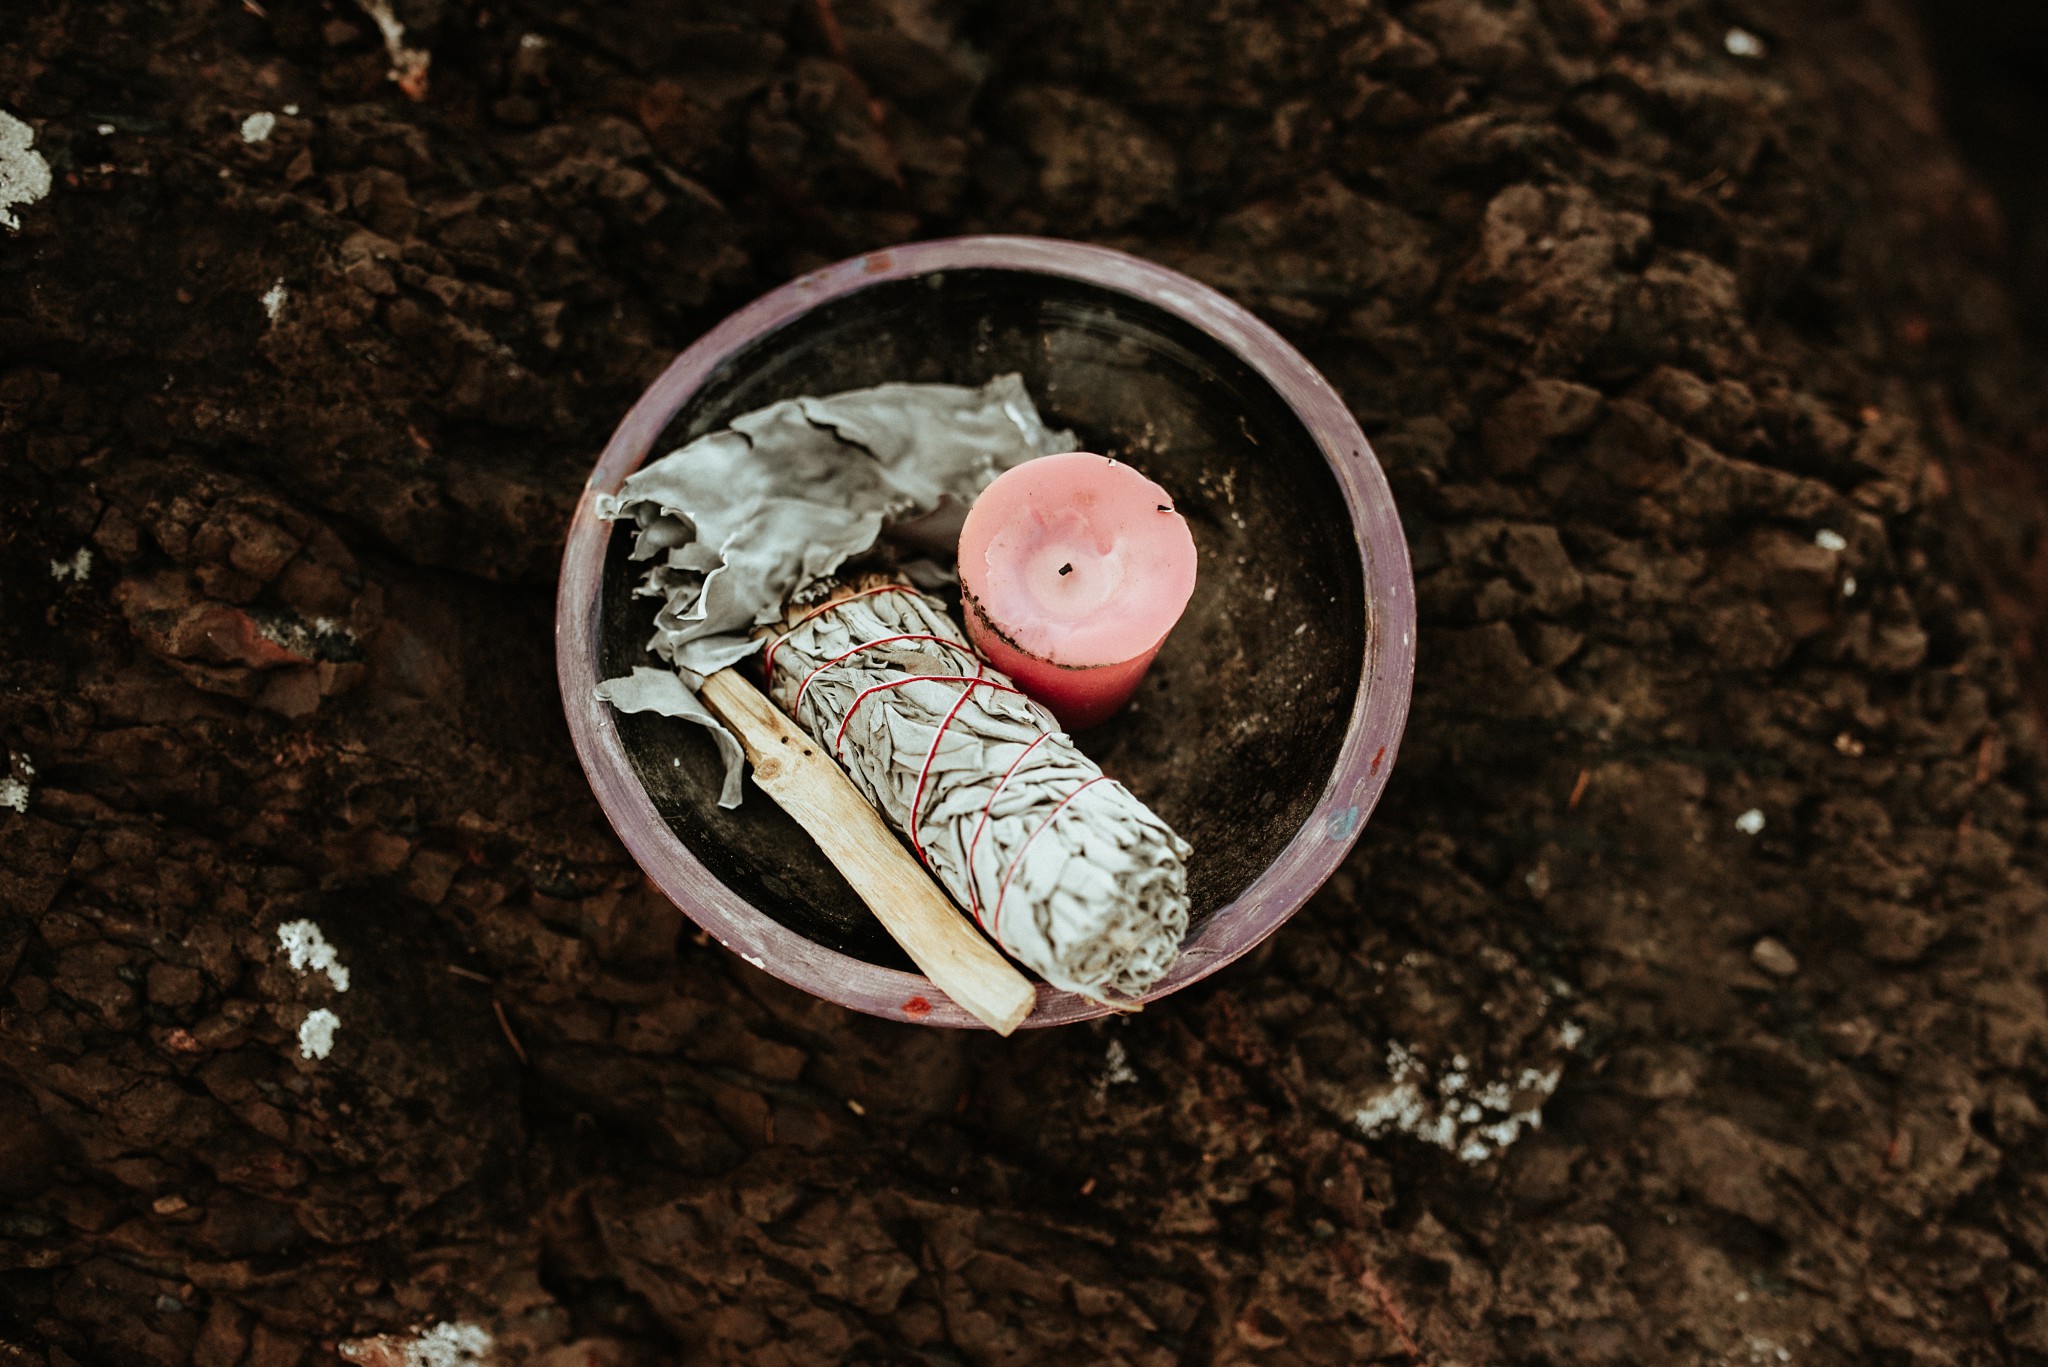 A bowl on the ground containing Reiki ceremony items- sage, a candle, and crystals.